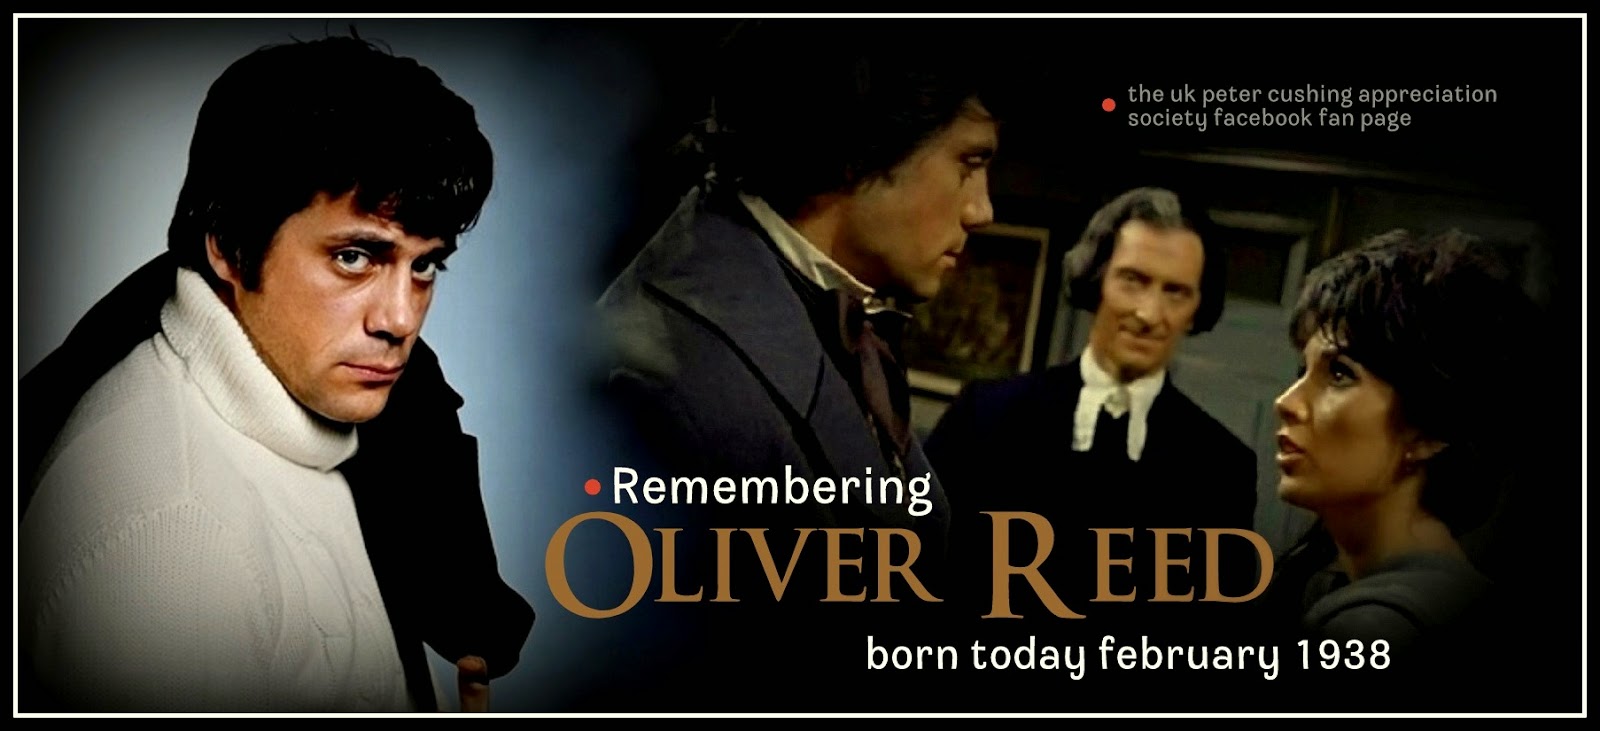 SS2816138) Movie picture of Oliver Reed buy celebrity photos and